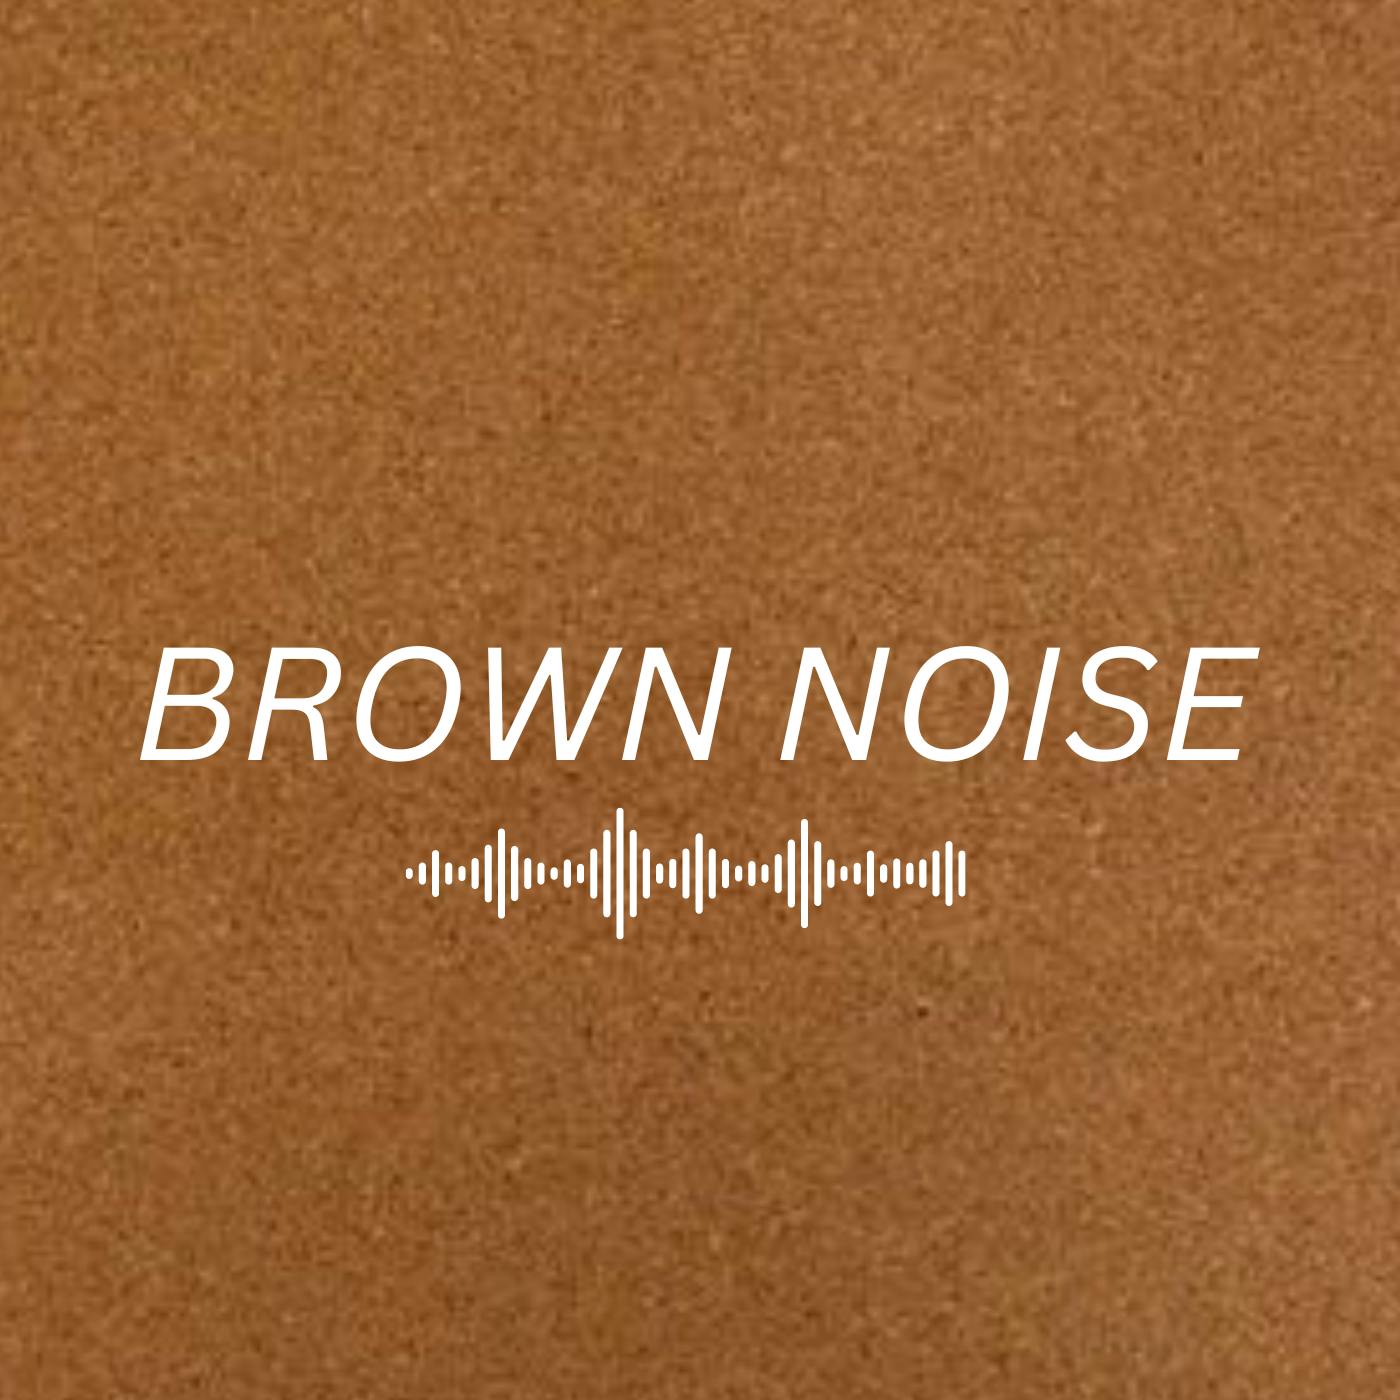 Smoothed Brown Noise 8-Hours - Remastered, for Relaxation, Sleep, Studying and Tinnitus ☯